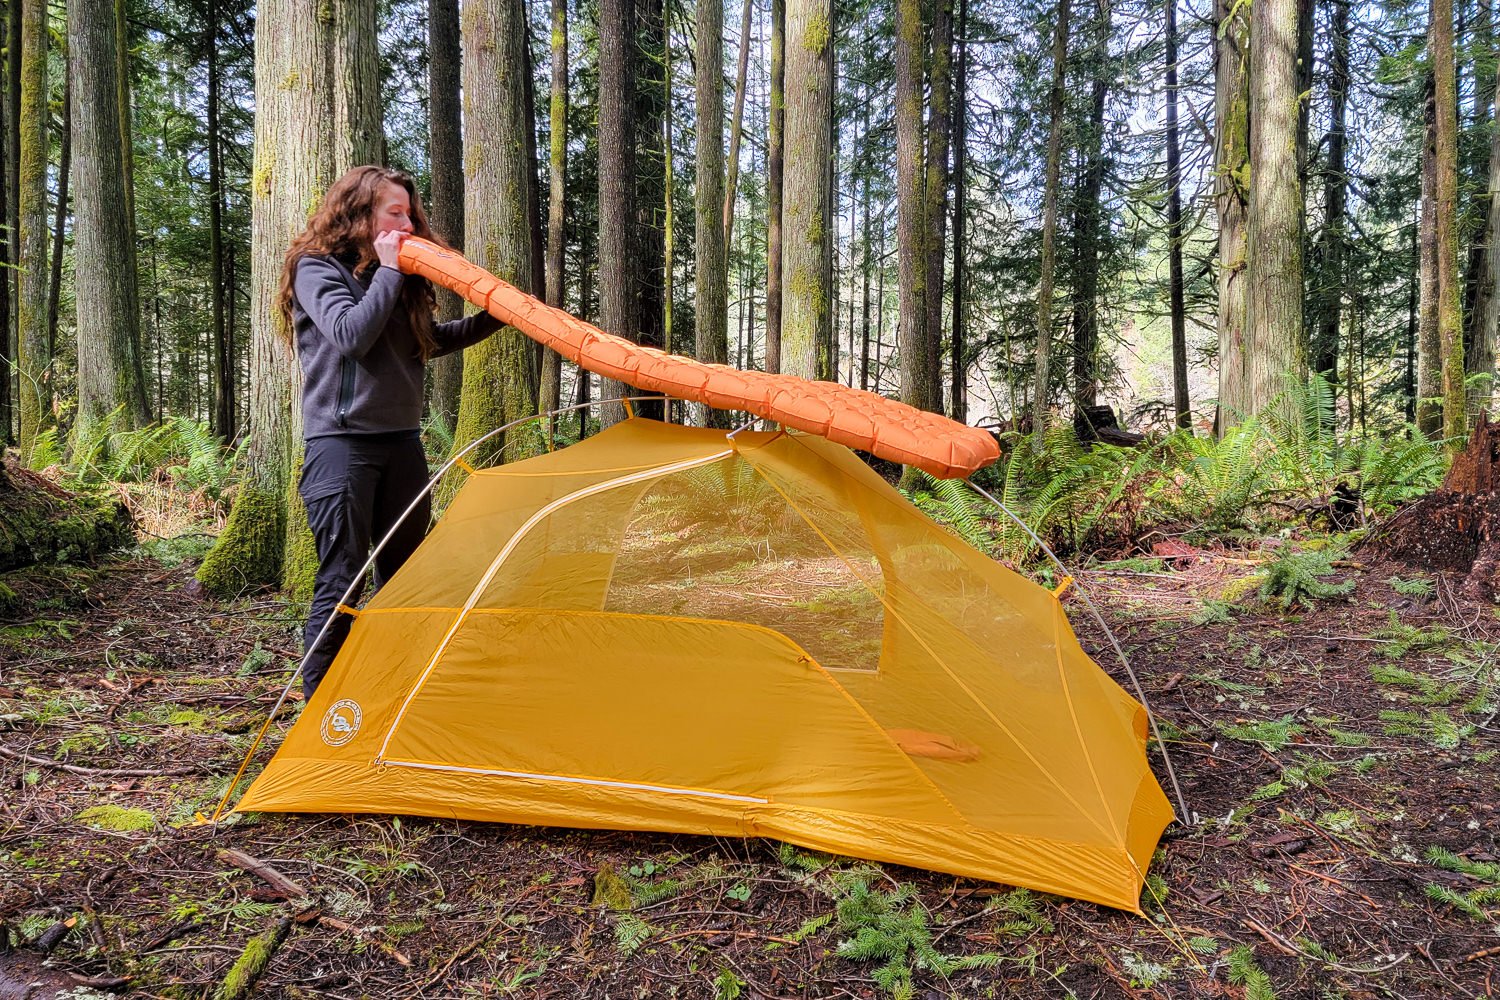 A hiker standing outside of a tent in a forest inflating the Big Agnes Zoom UL pad by mouth